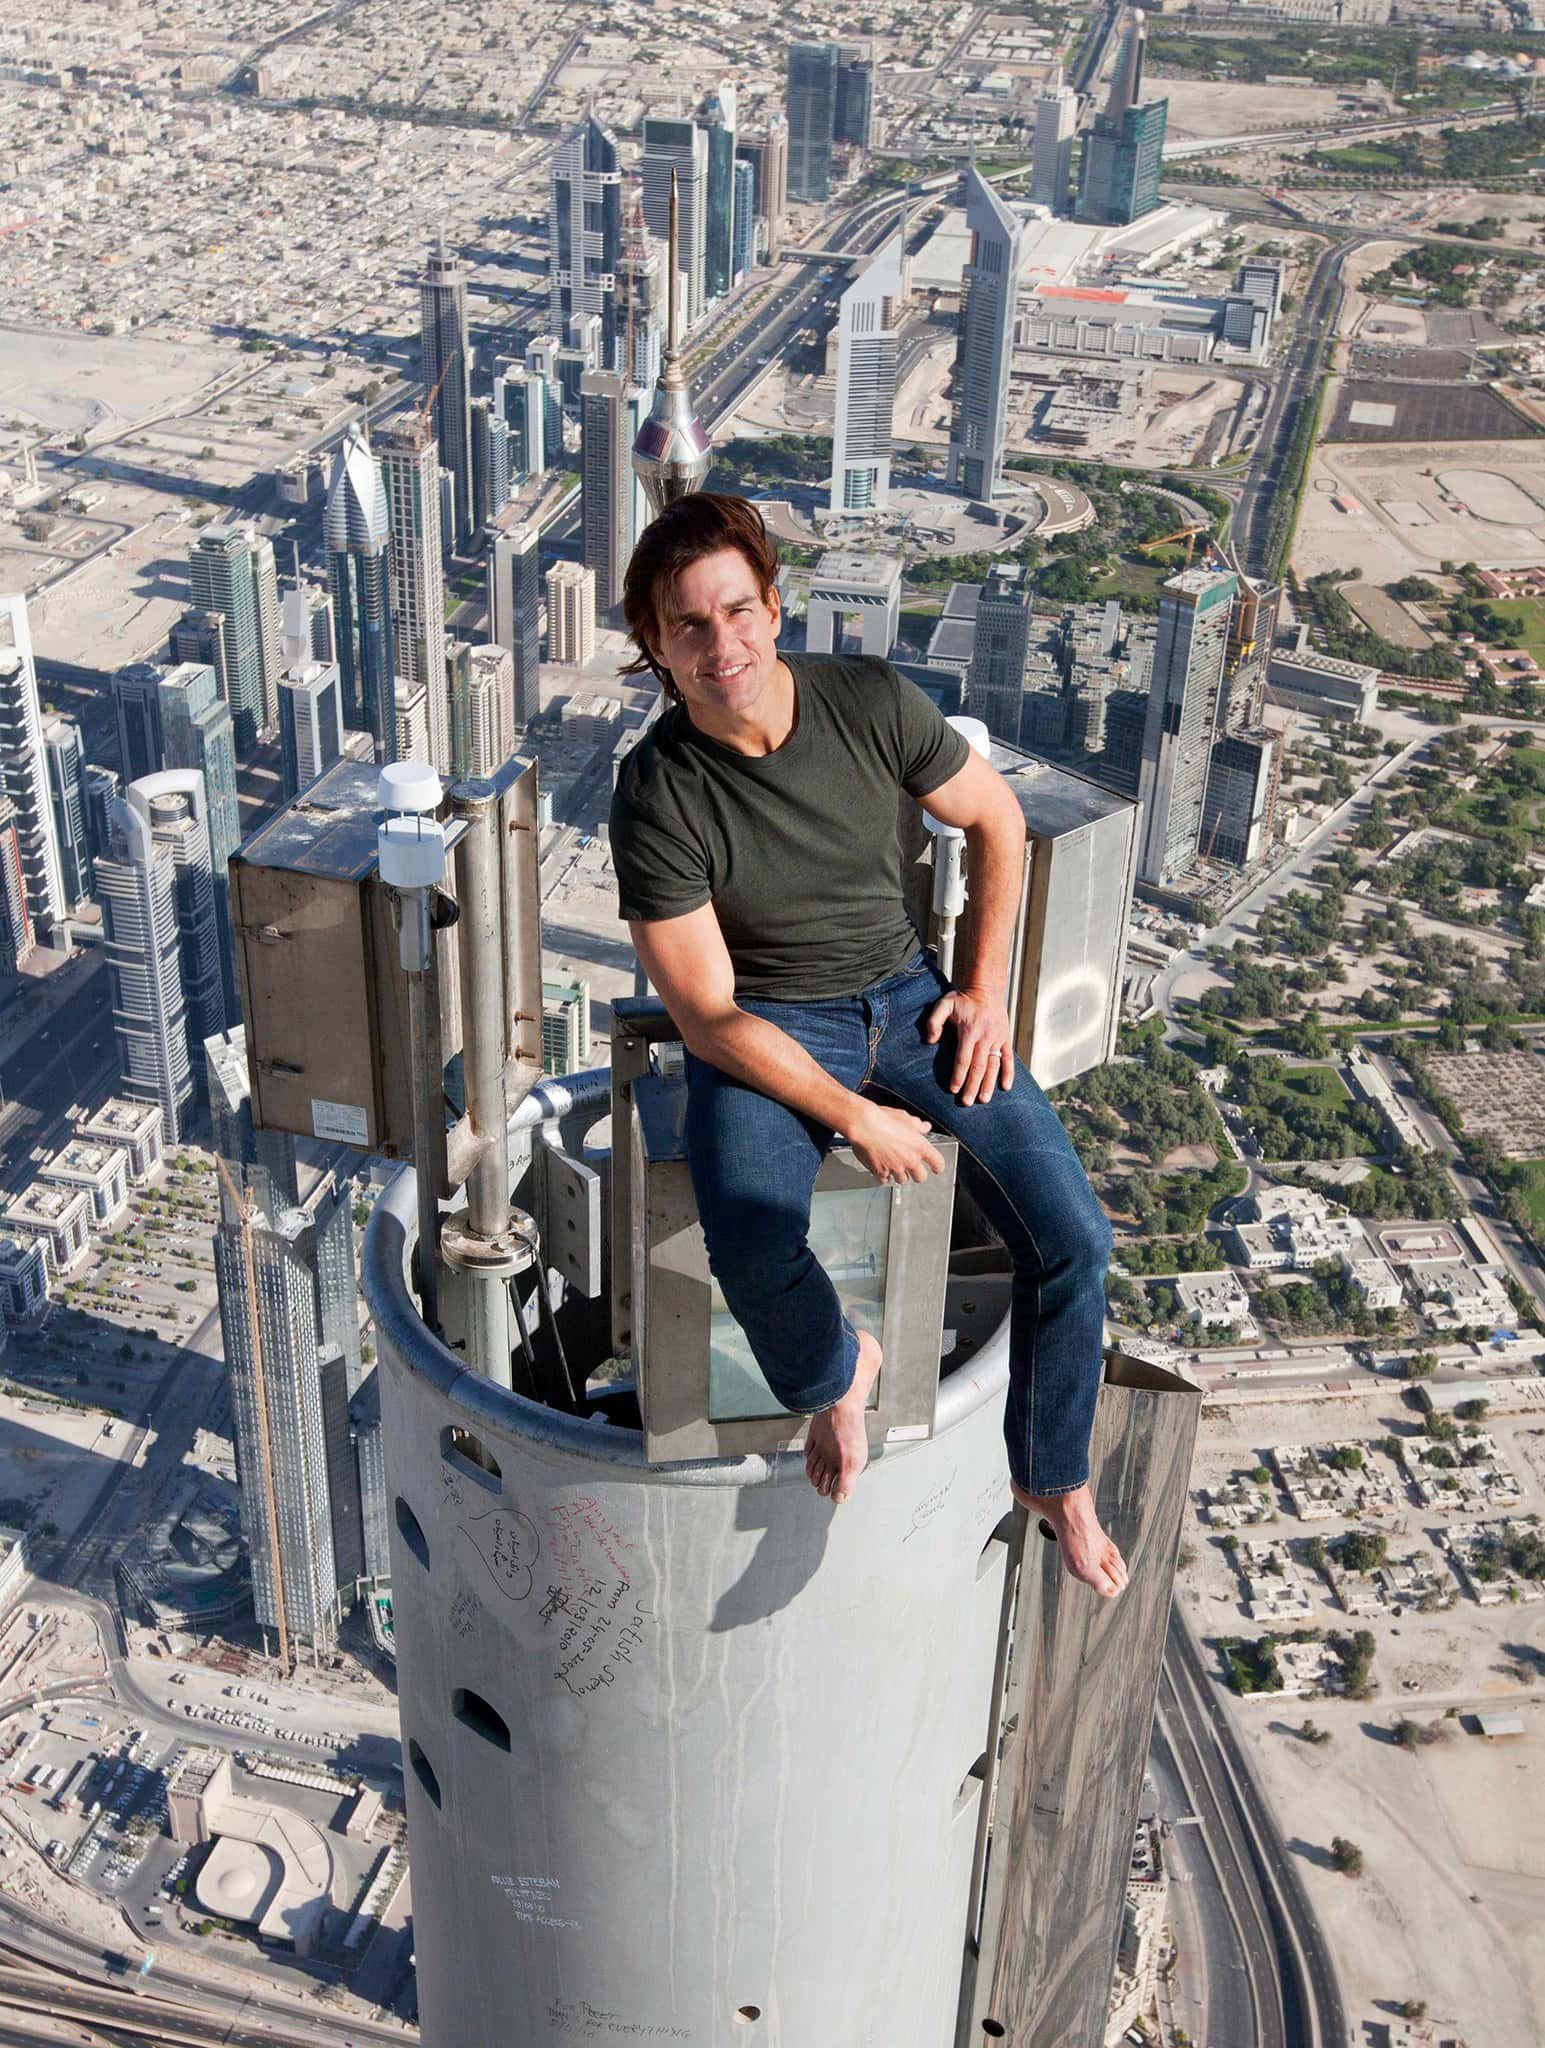 Then 49-year-old Tom Cruise did some death-defying stunts for Mission: Impossible Ghost Protocol, including scaling the world's tallest building, the Burj Khalifa in Dubai